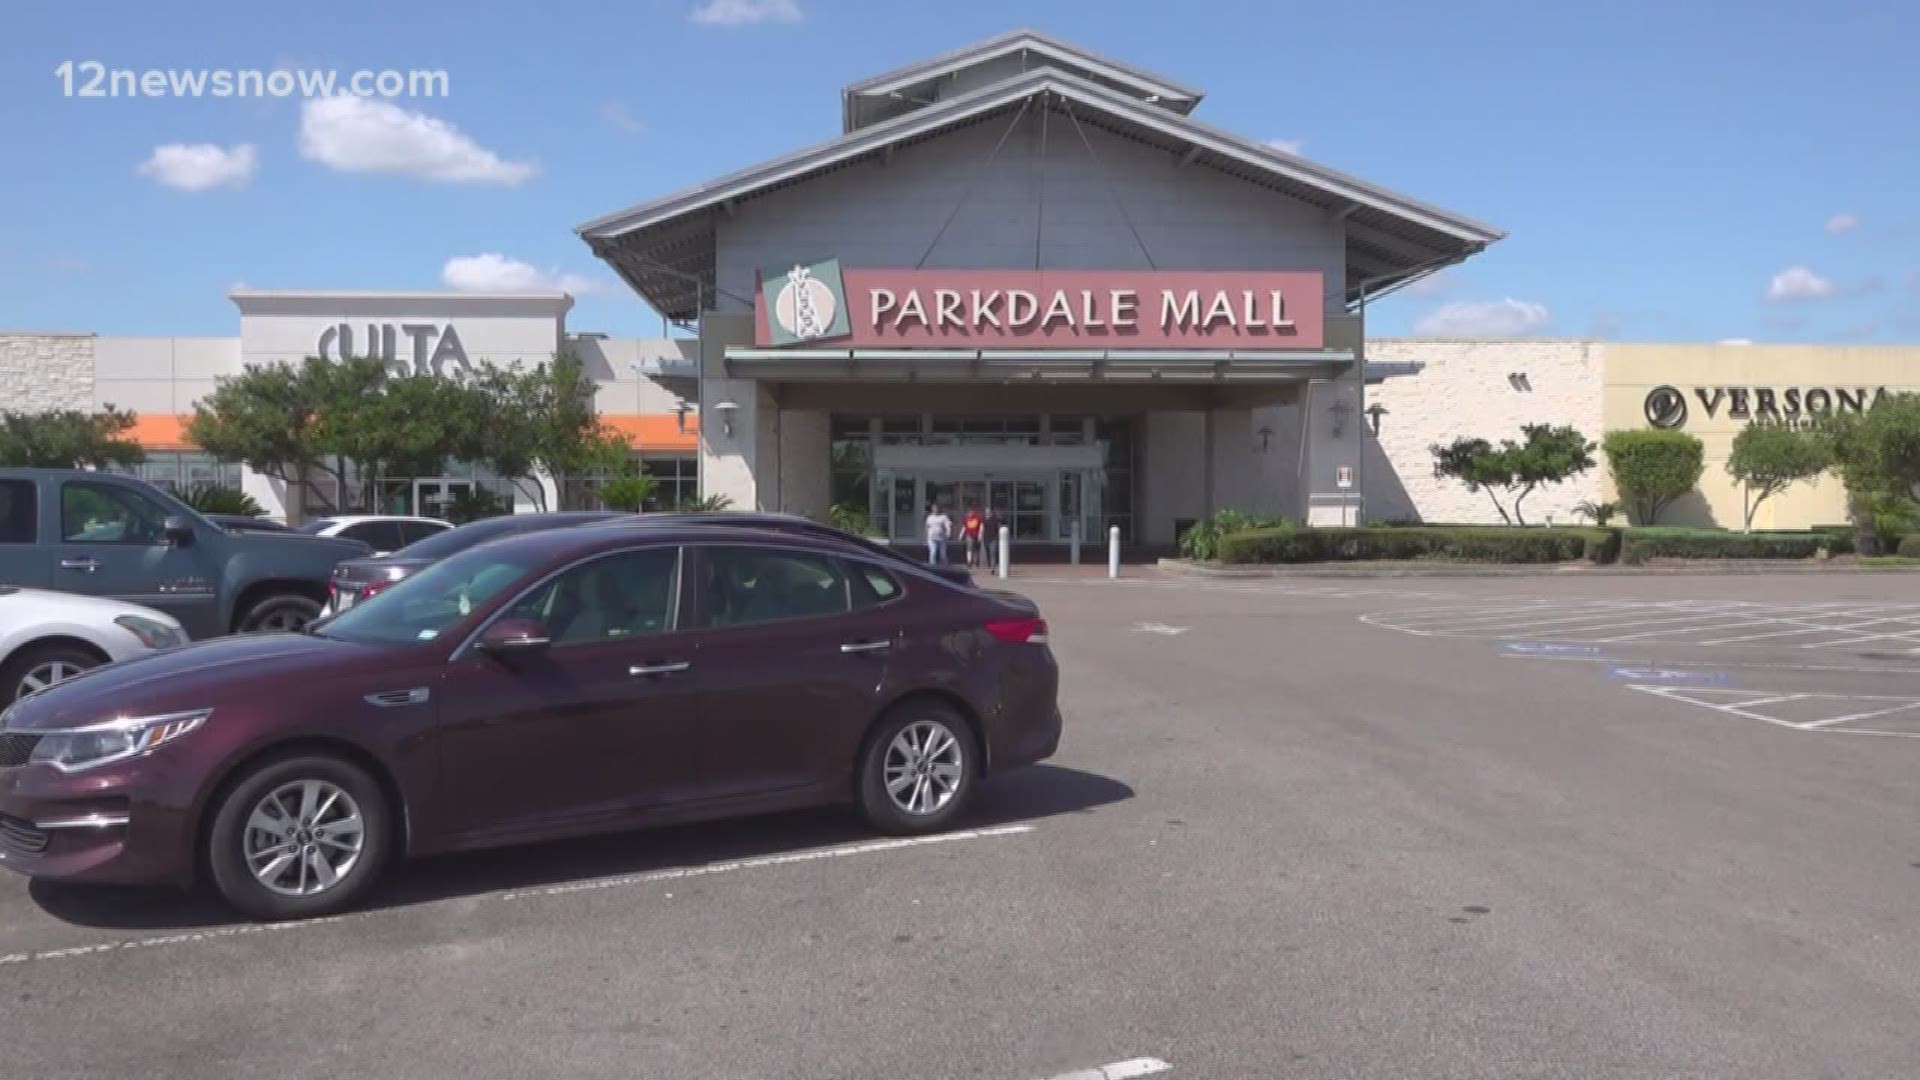 The incident took place at Parkdale Mall in February 2020.